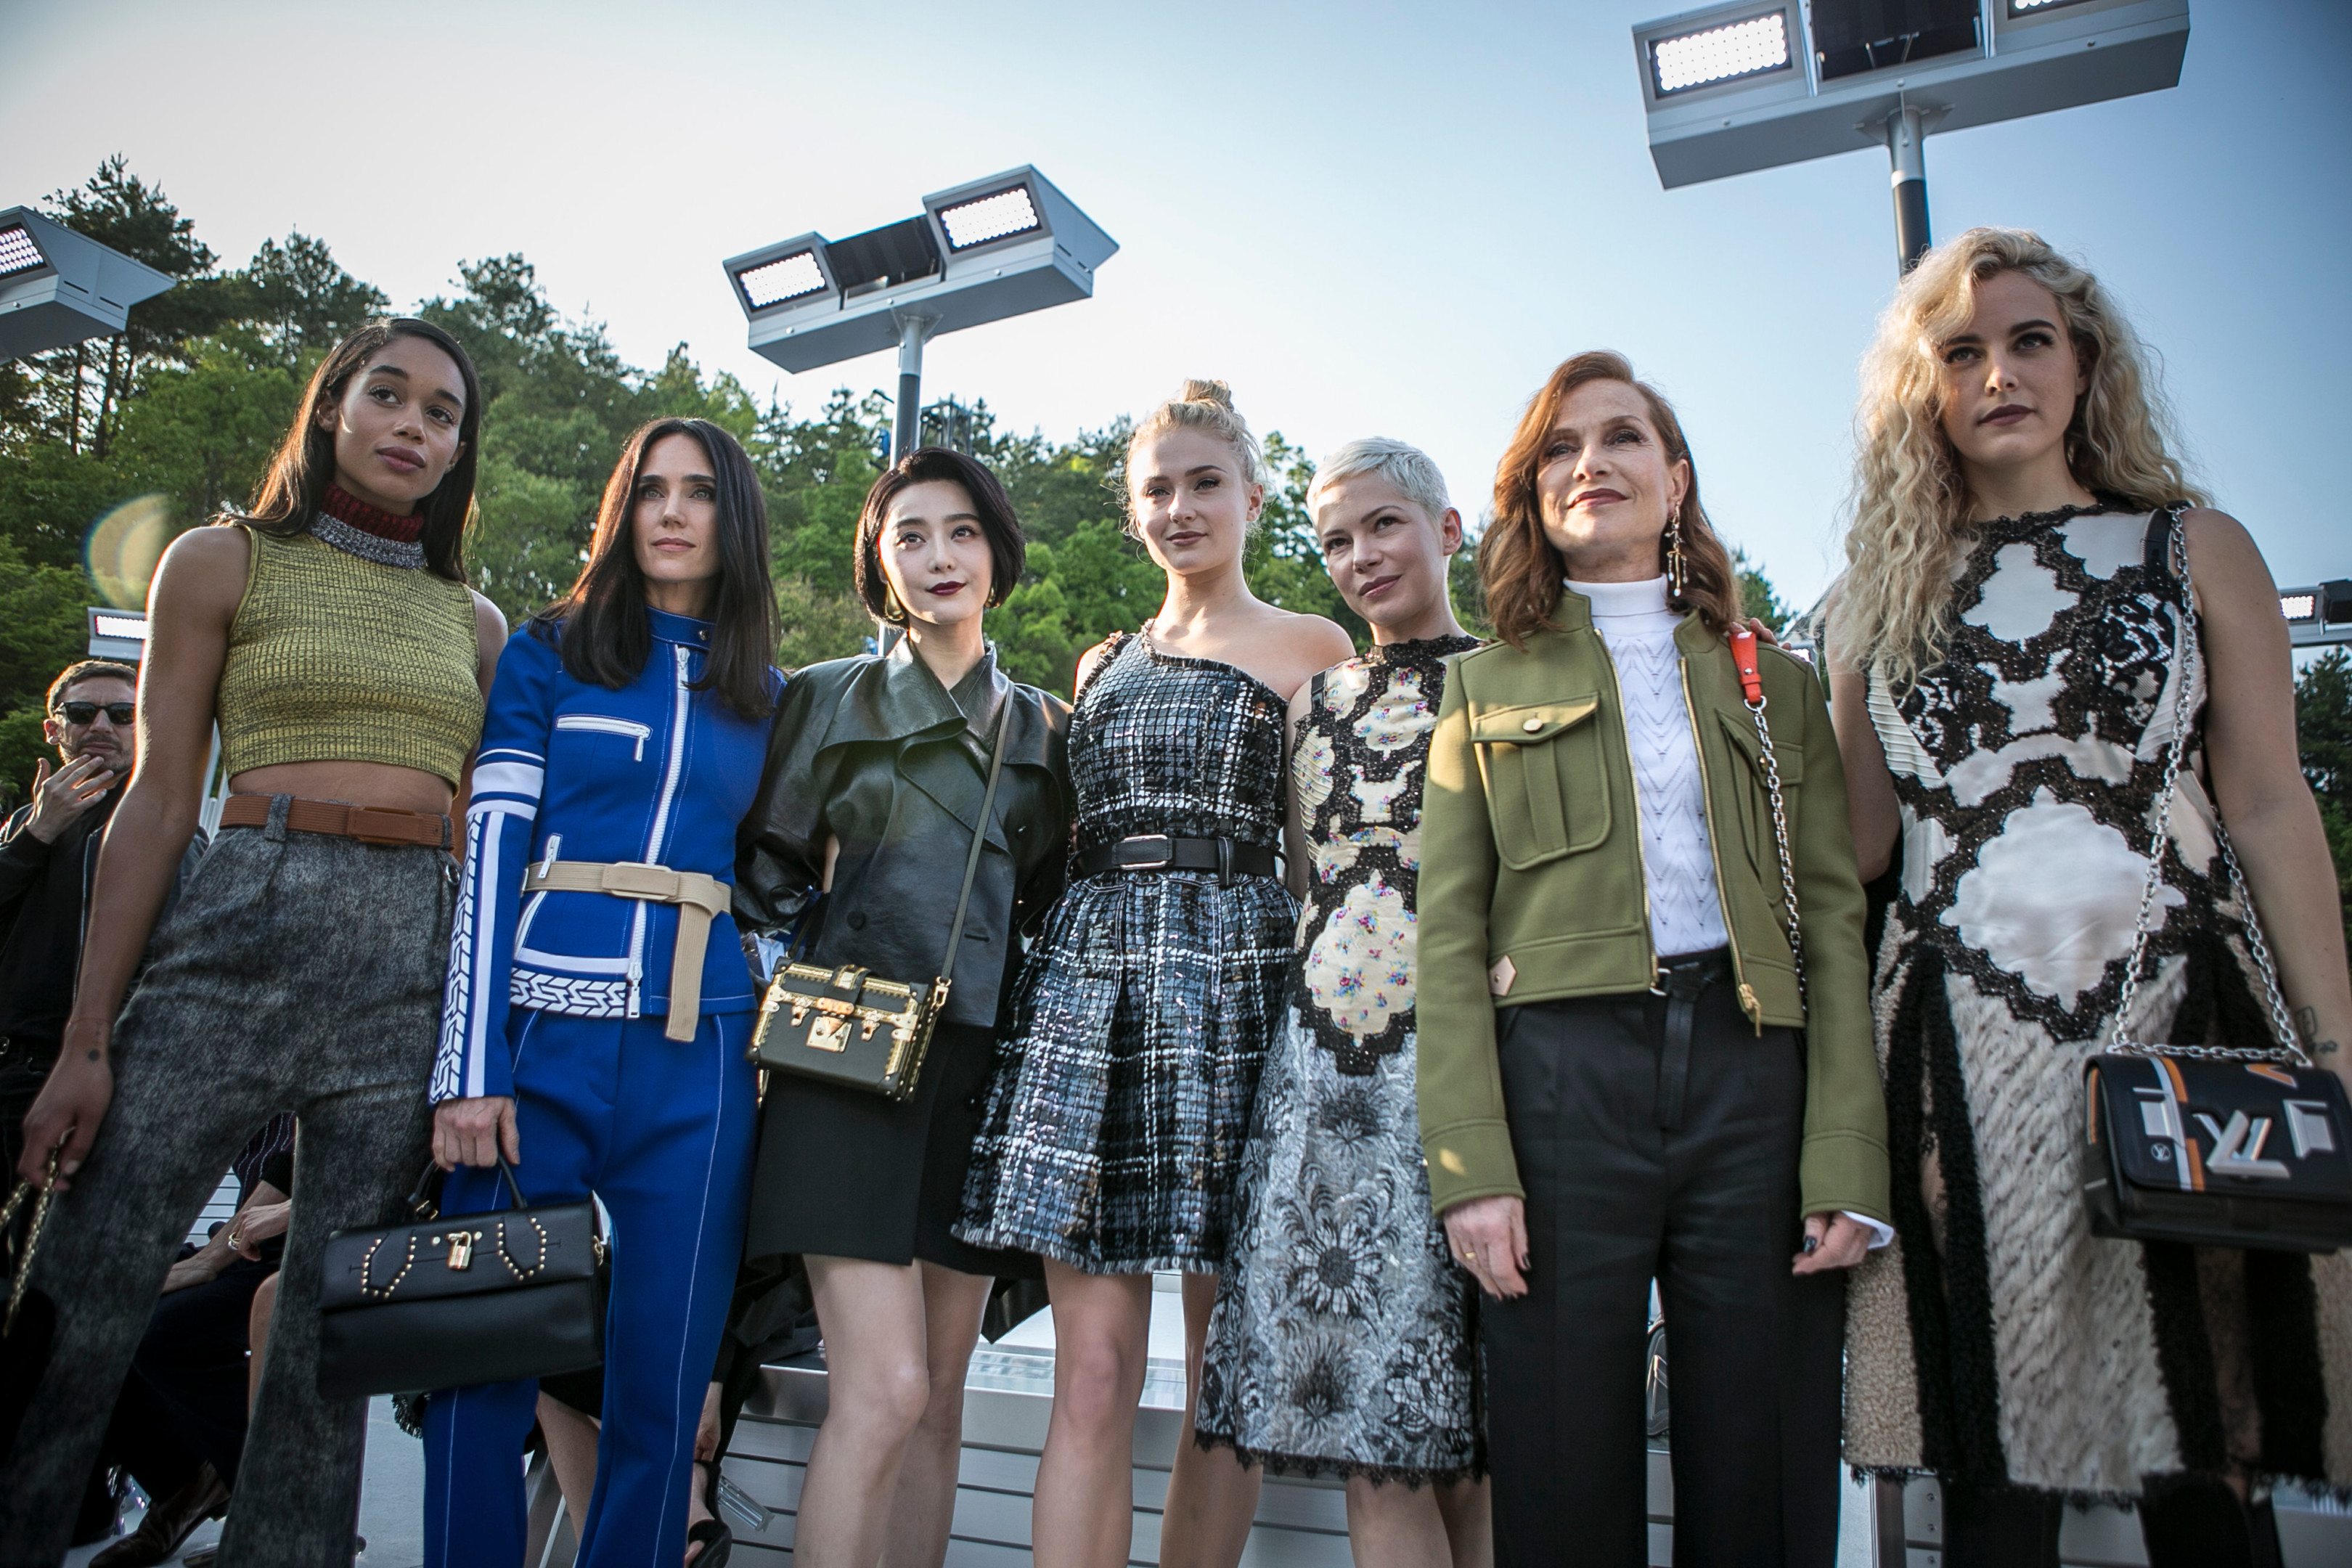 Louis Vuitton Cruise 2018: See the Best Dressed Celebrities + Top Runway  Looks - FASHION Magazine